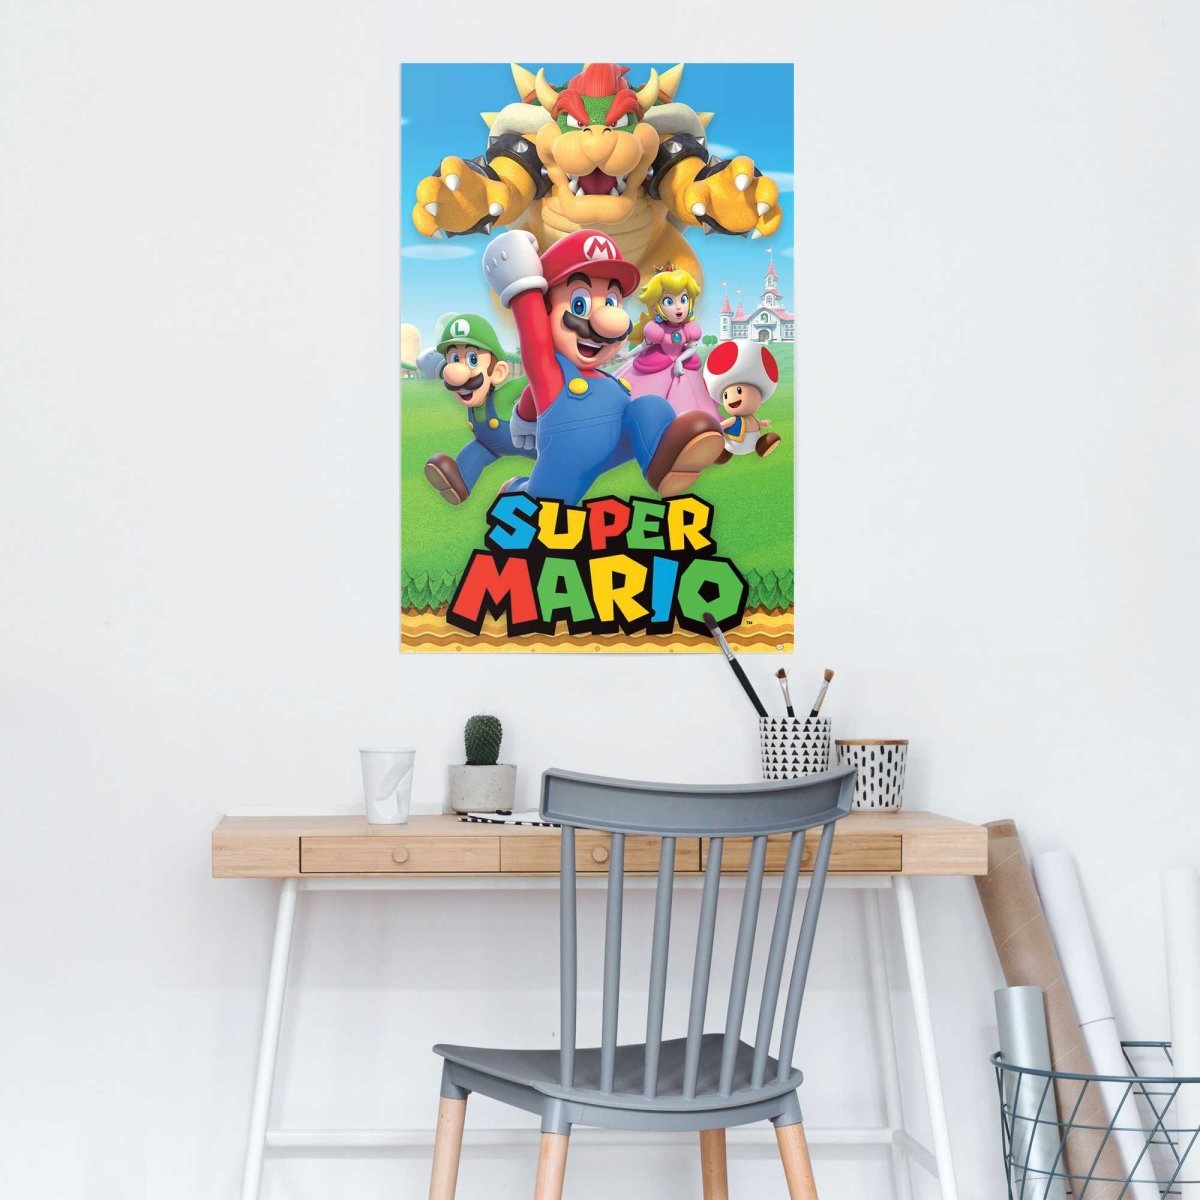 Poster Super Mario - character montage 91,5x61 - Reinders